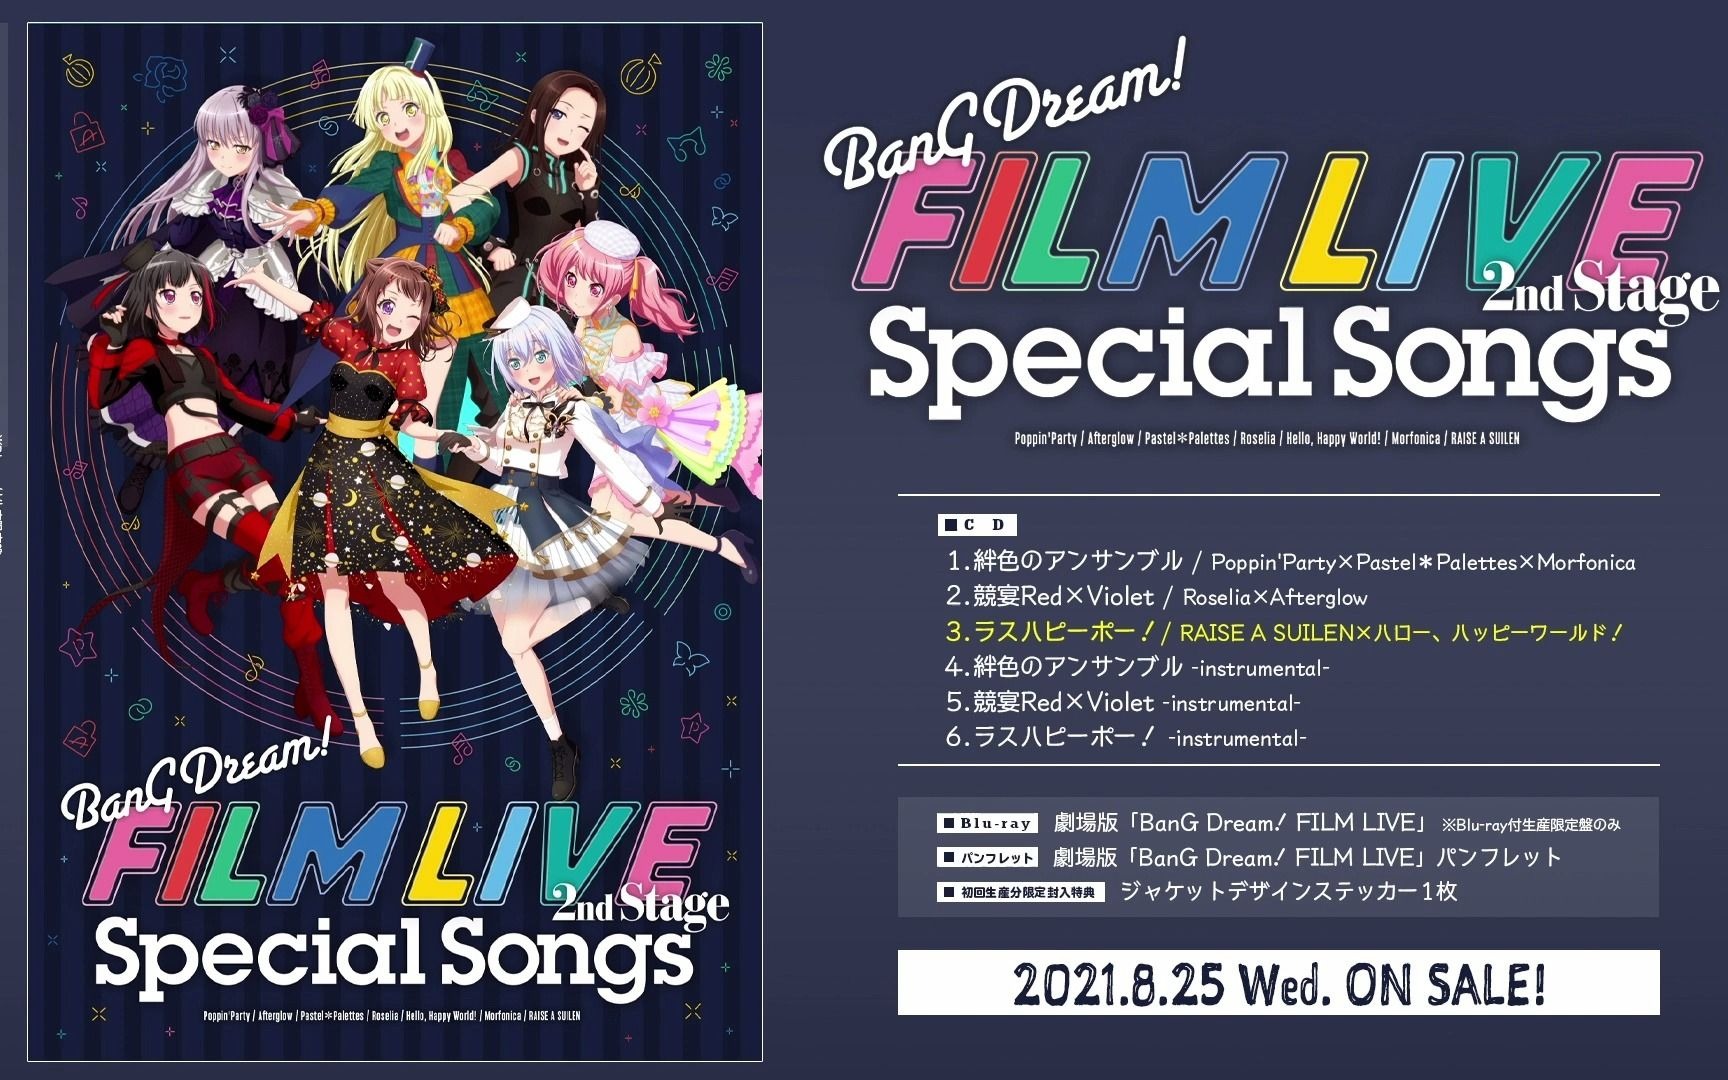 BanG Dream! FILM LIVE 2nd Stage パンフレット！ - 邦画